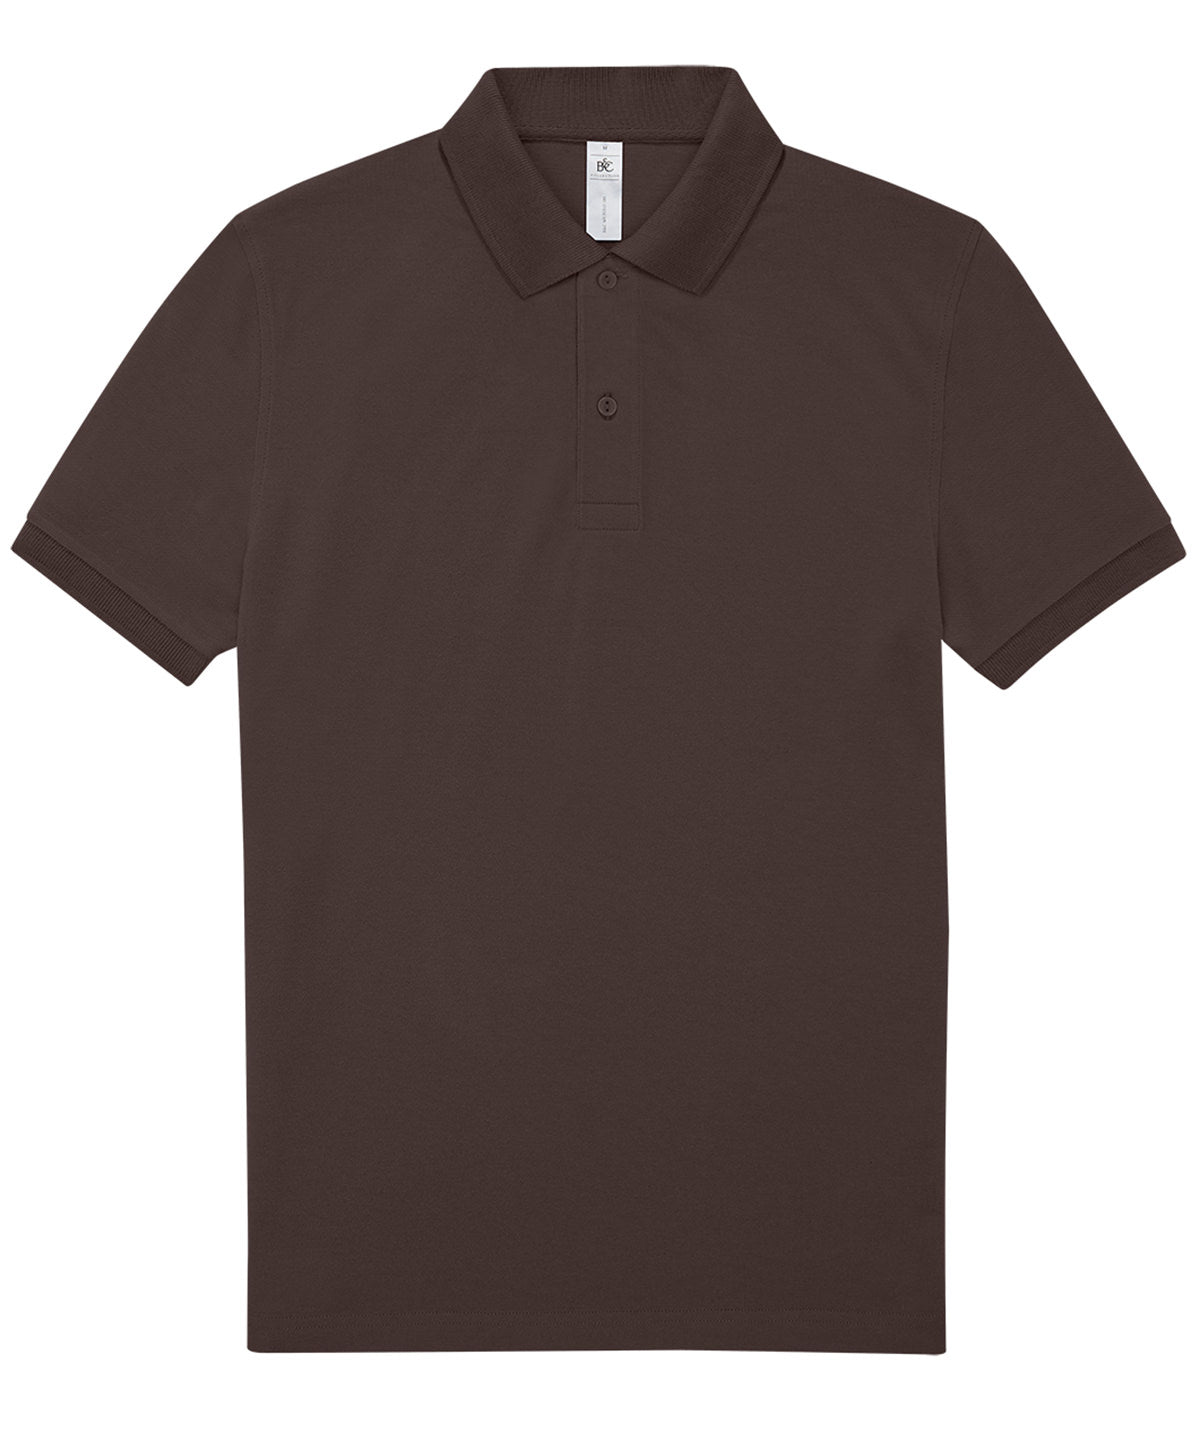 B&C Collection My Polo 180 Roasted Coffee